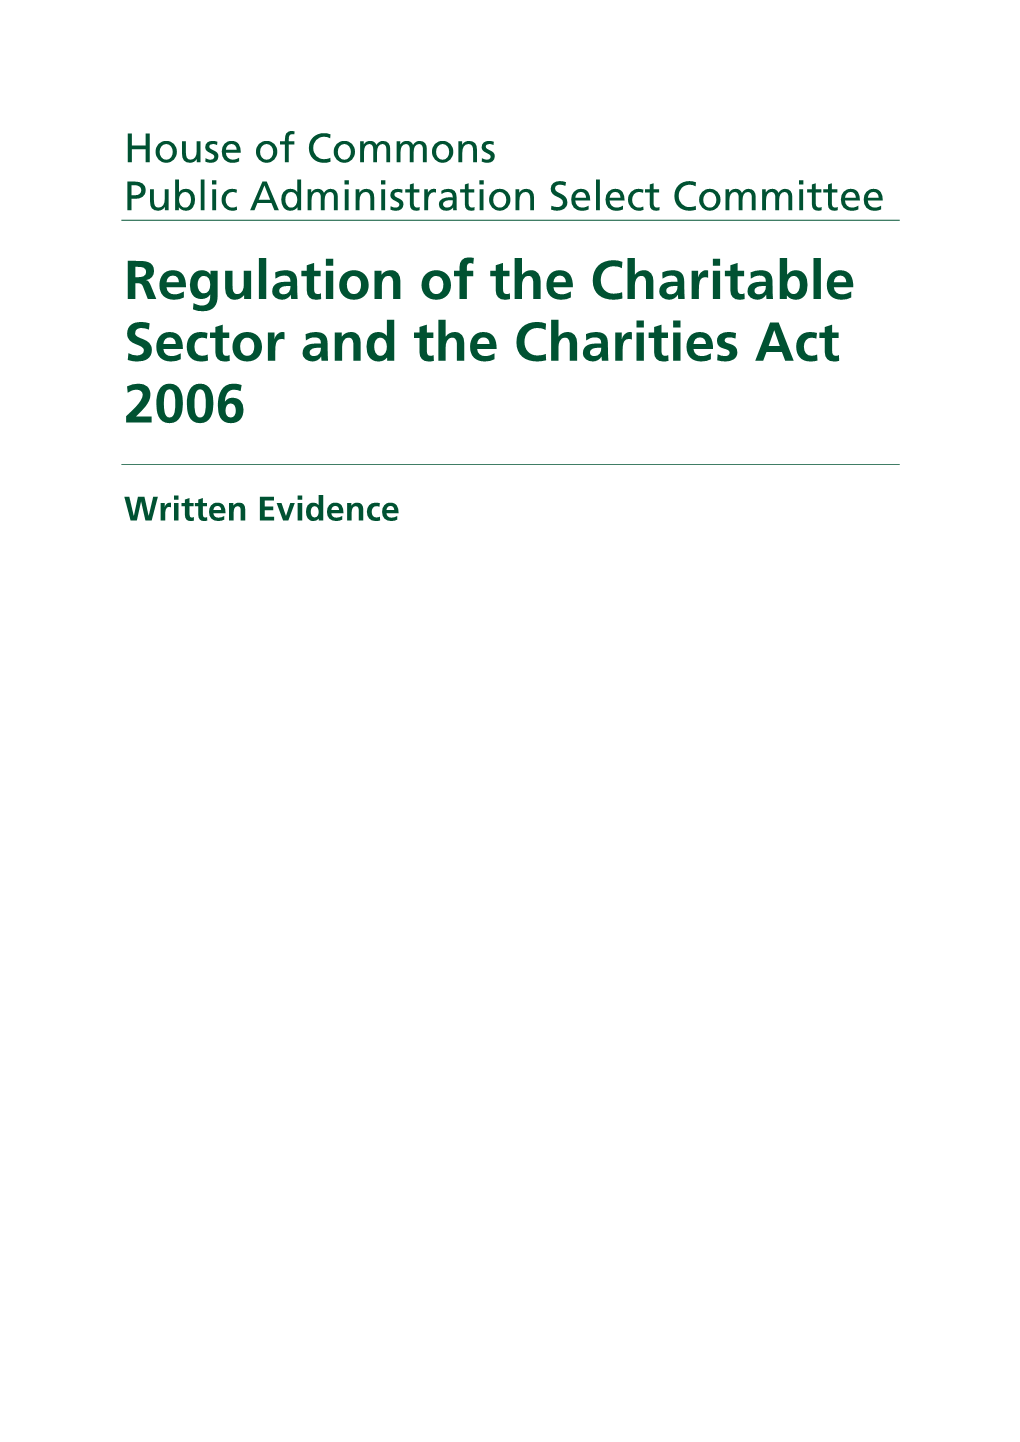 Regulation of the Charitable Sector and the Charities Act 2006